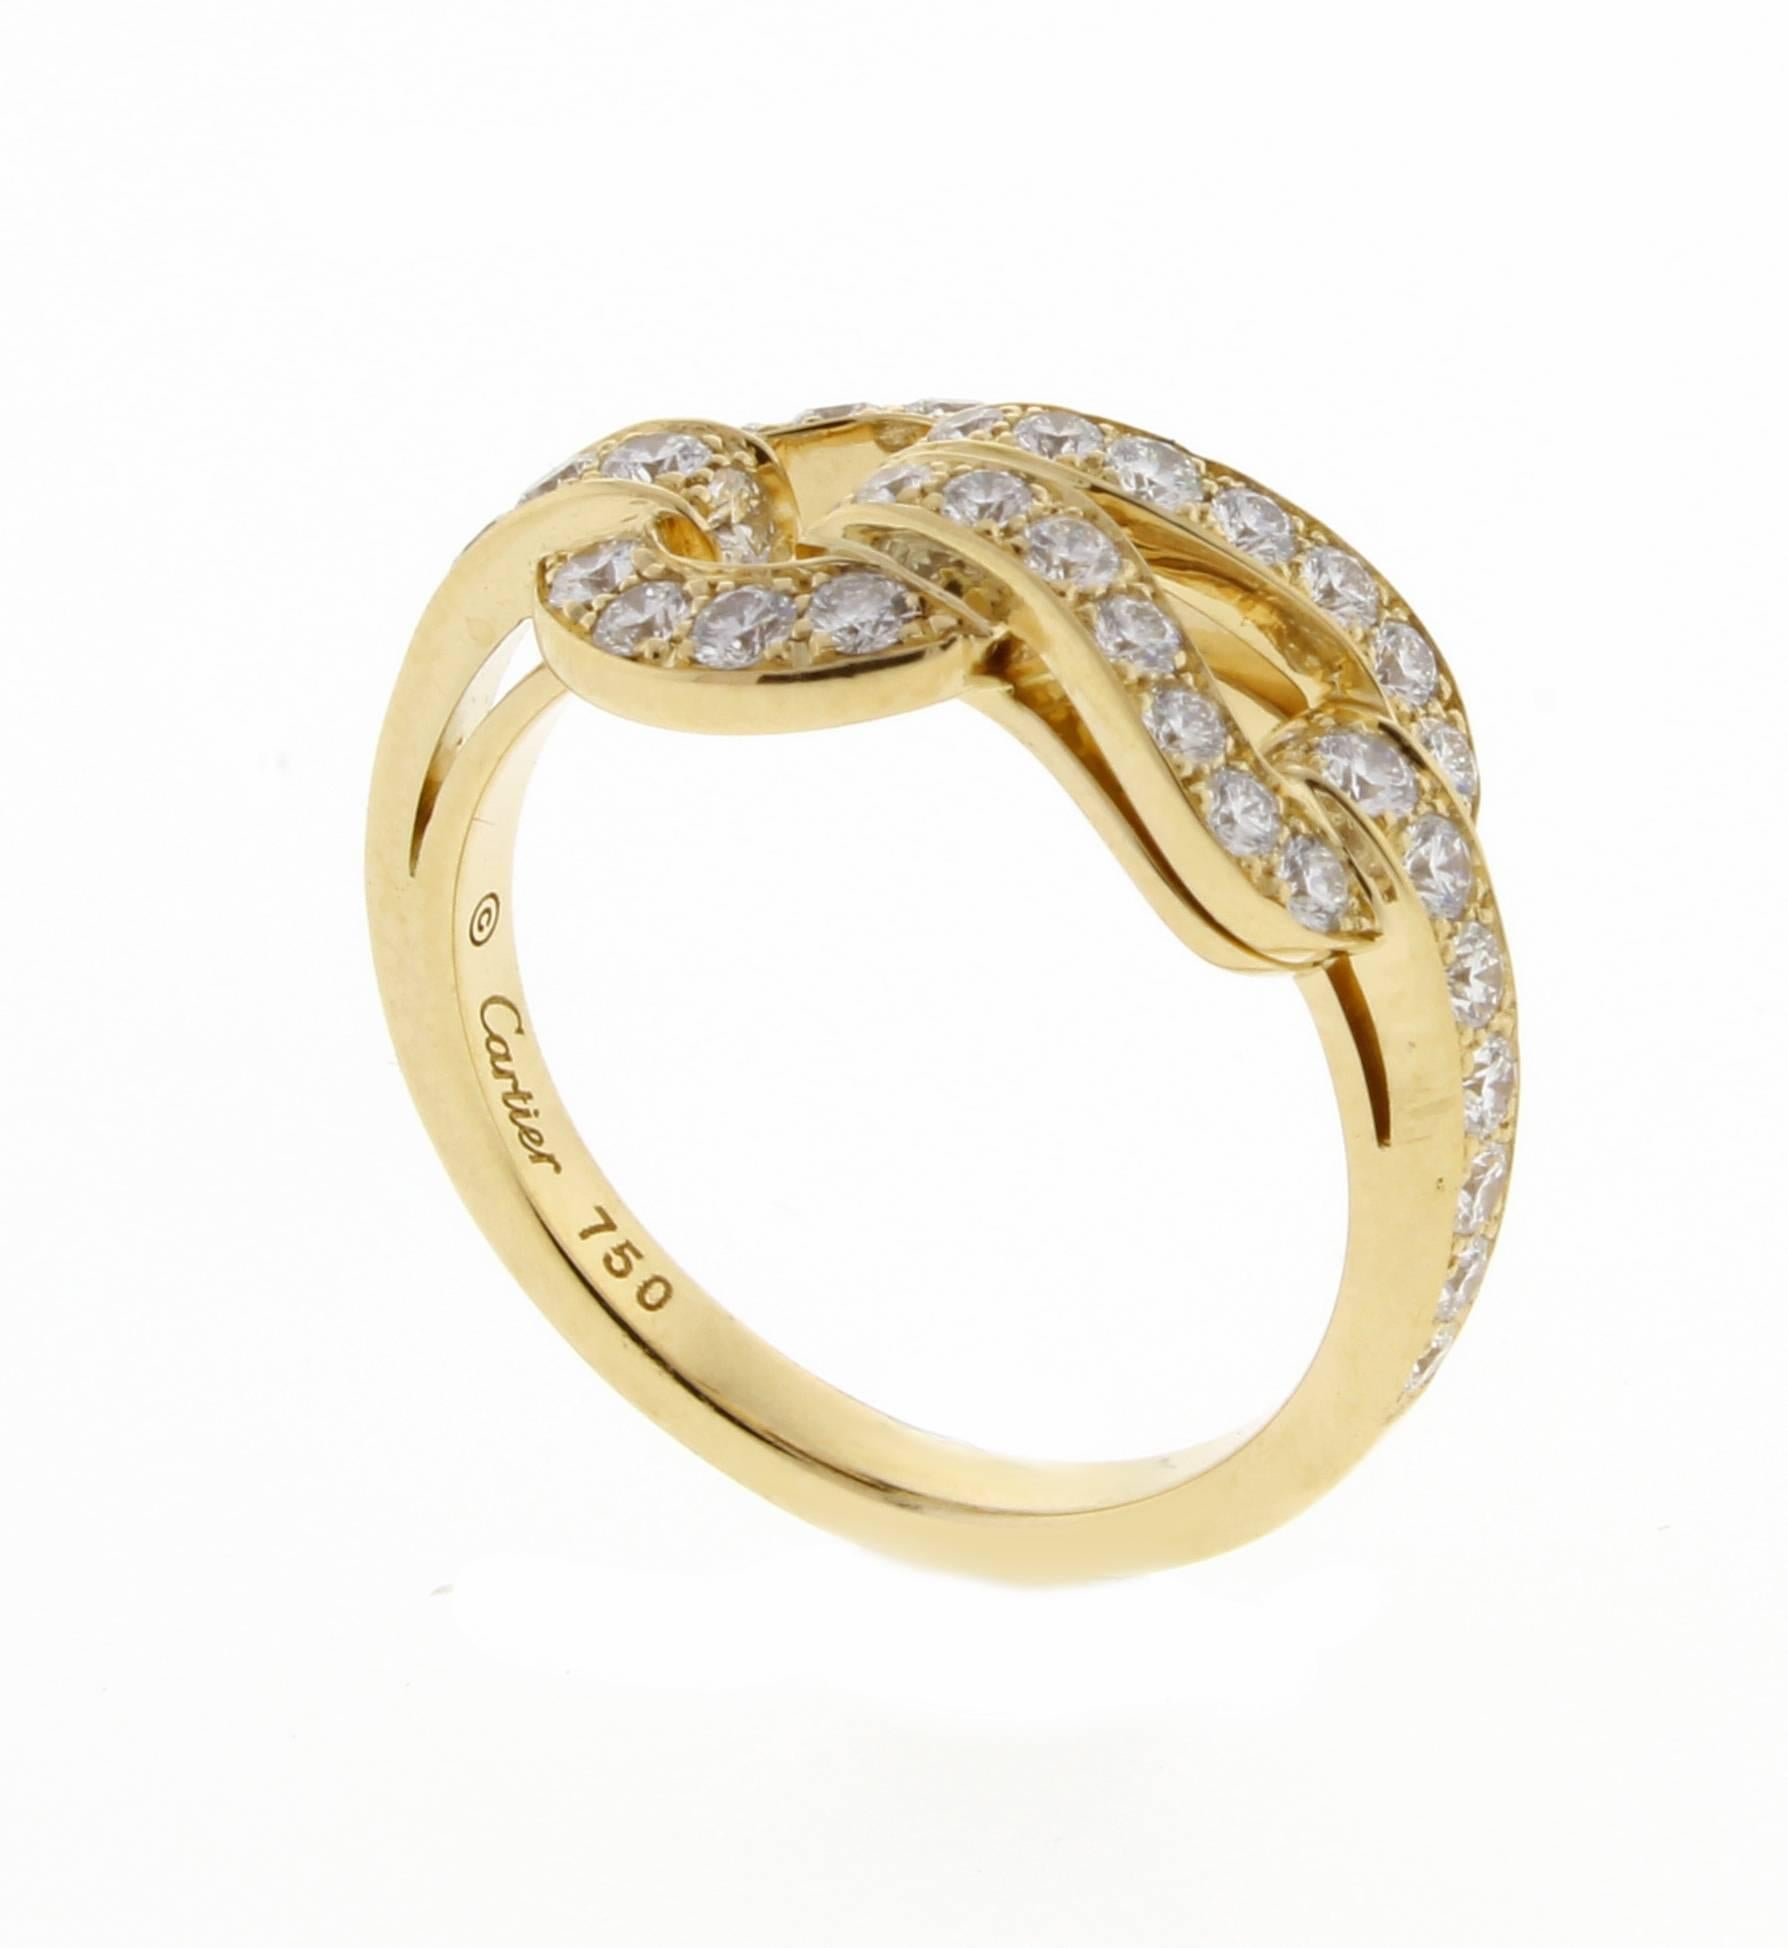 Cartier 18 karat yellow gold diamond Agrafe ring. Cartier borrowed the central motif for this jewelry collection from the world of fashion. Inspired by the clasps of the corsets this 18 karat yellow gold ring is refined and sophisticated. Set with